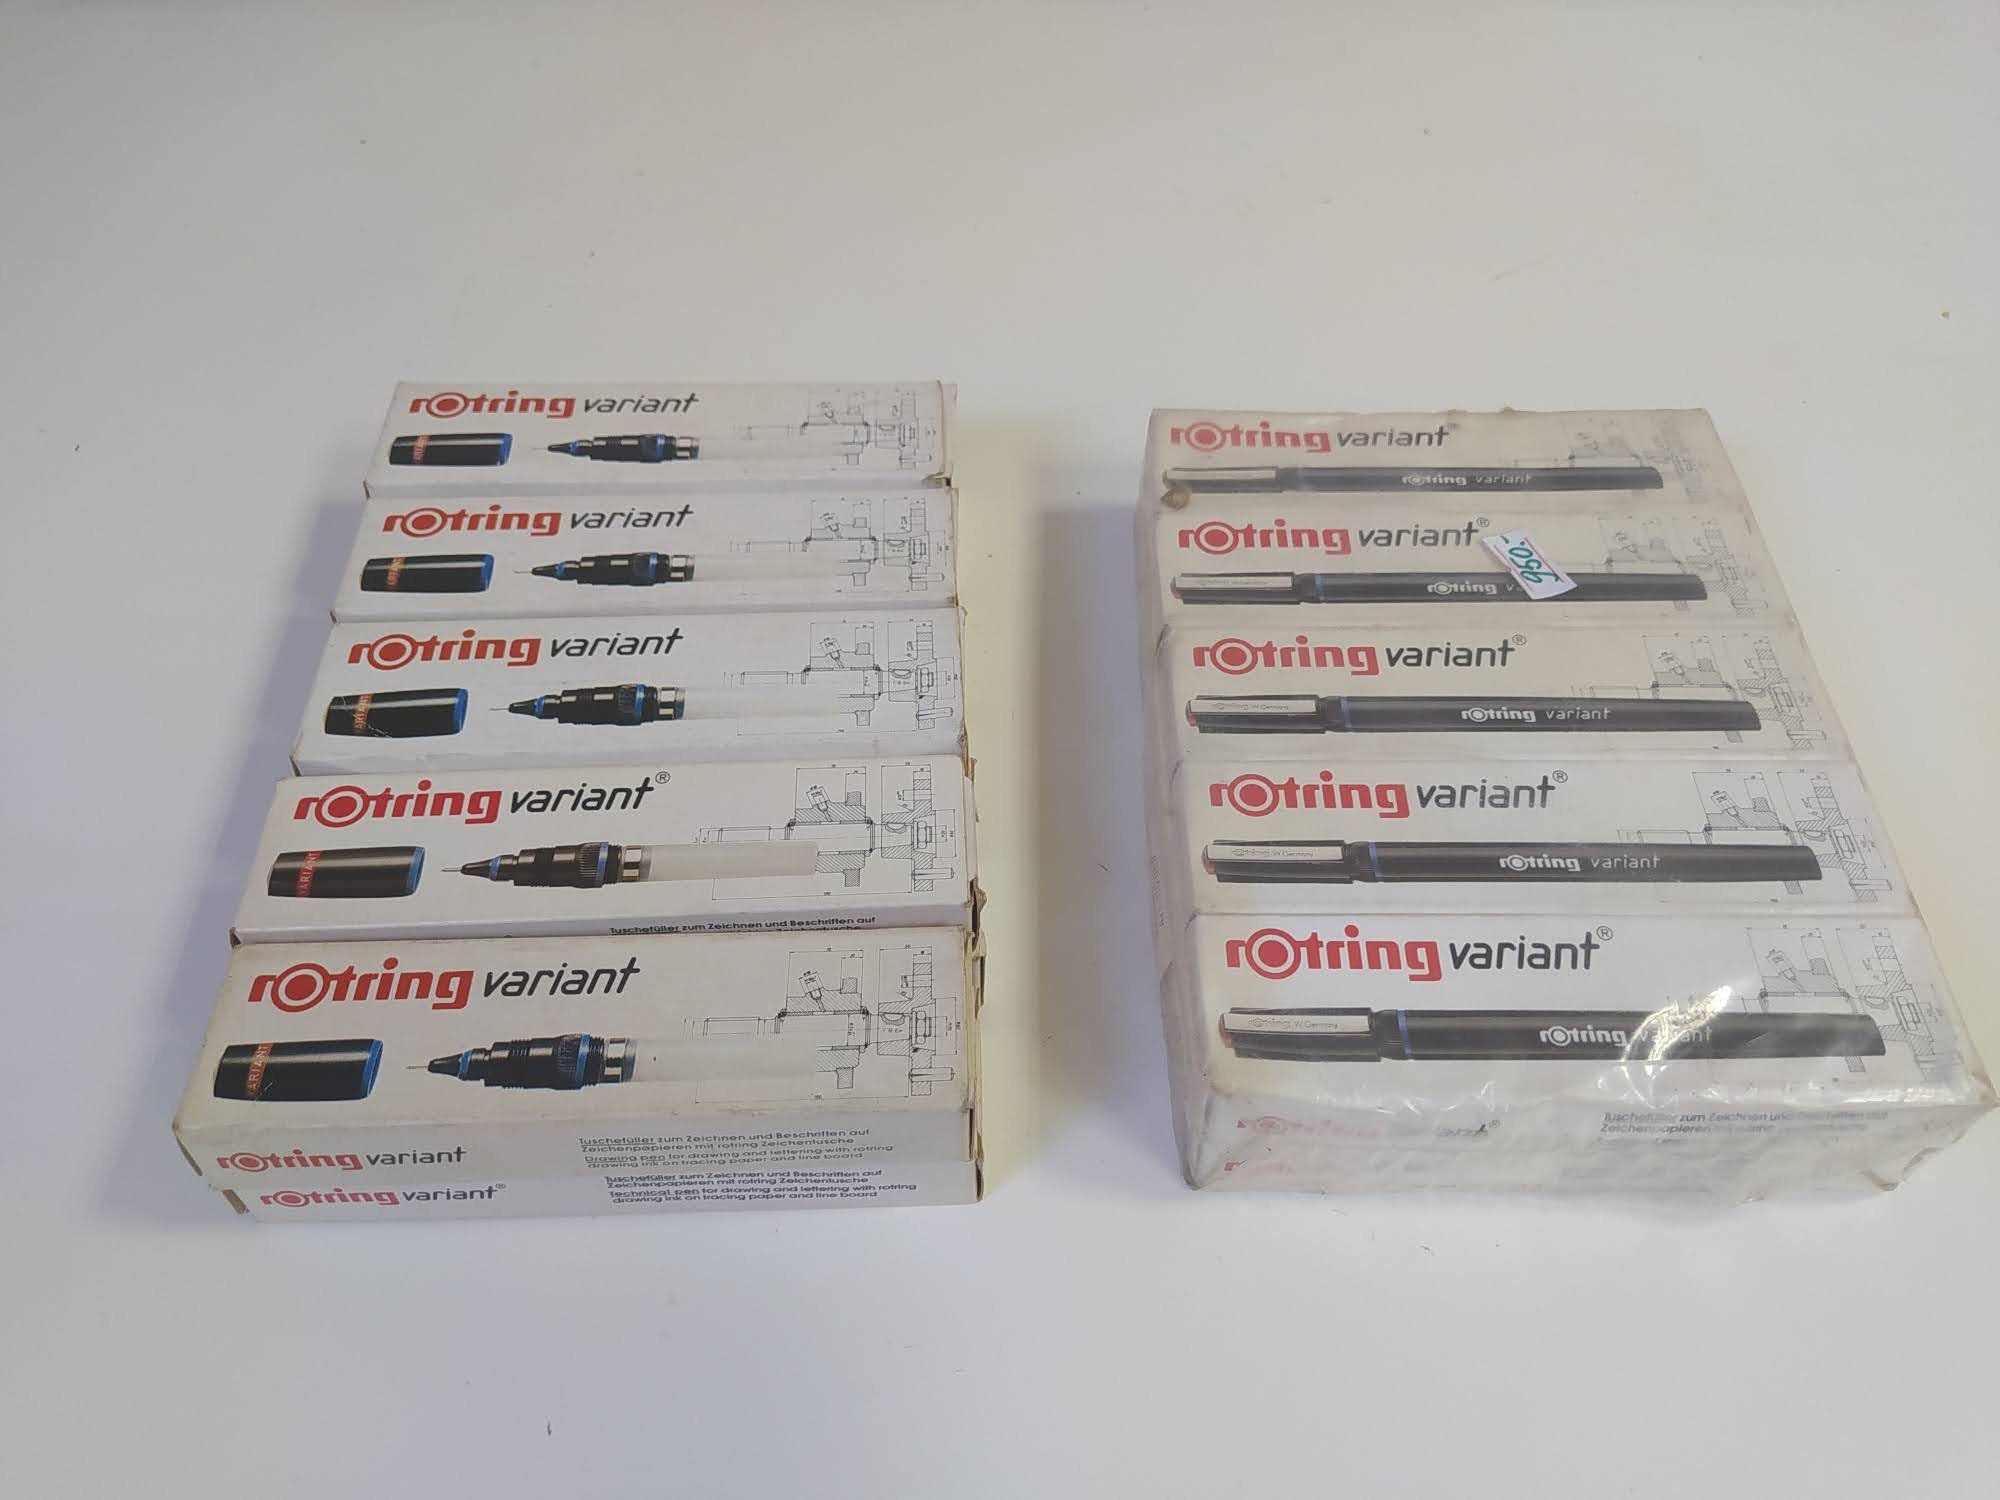 NOS Vintage Rotring Variant Stainless Steel Tip Technical Pen